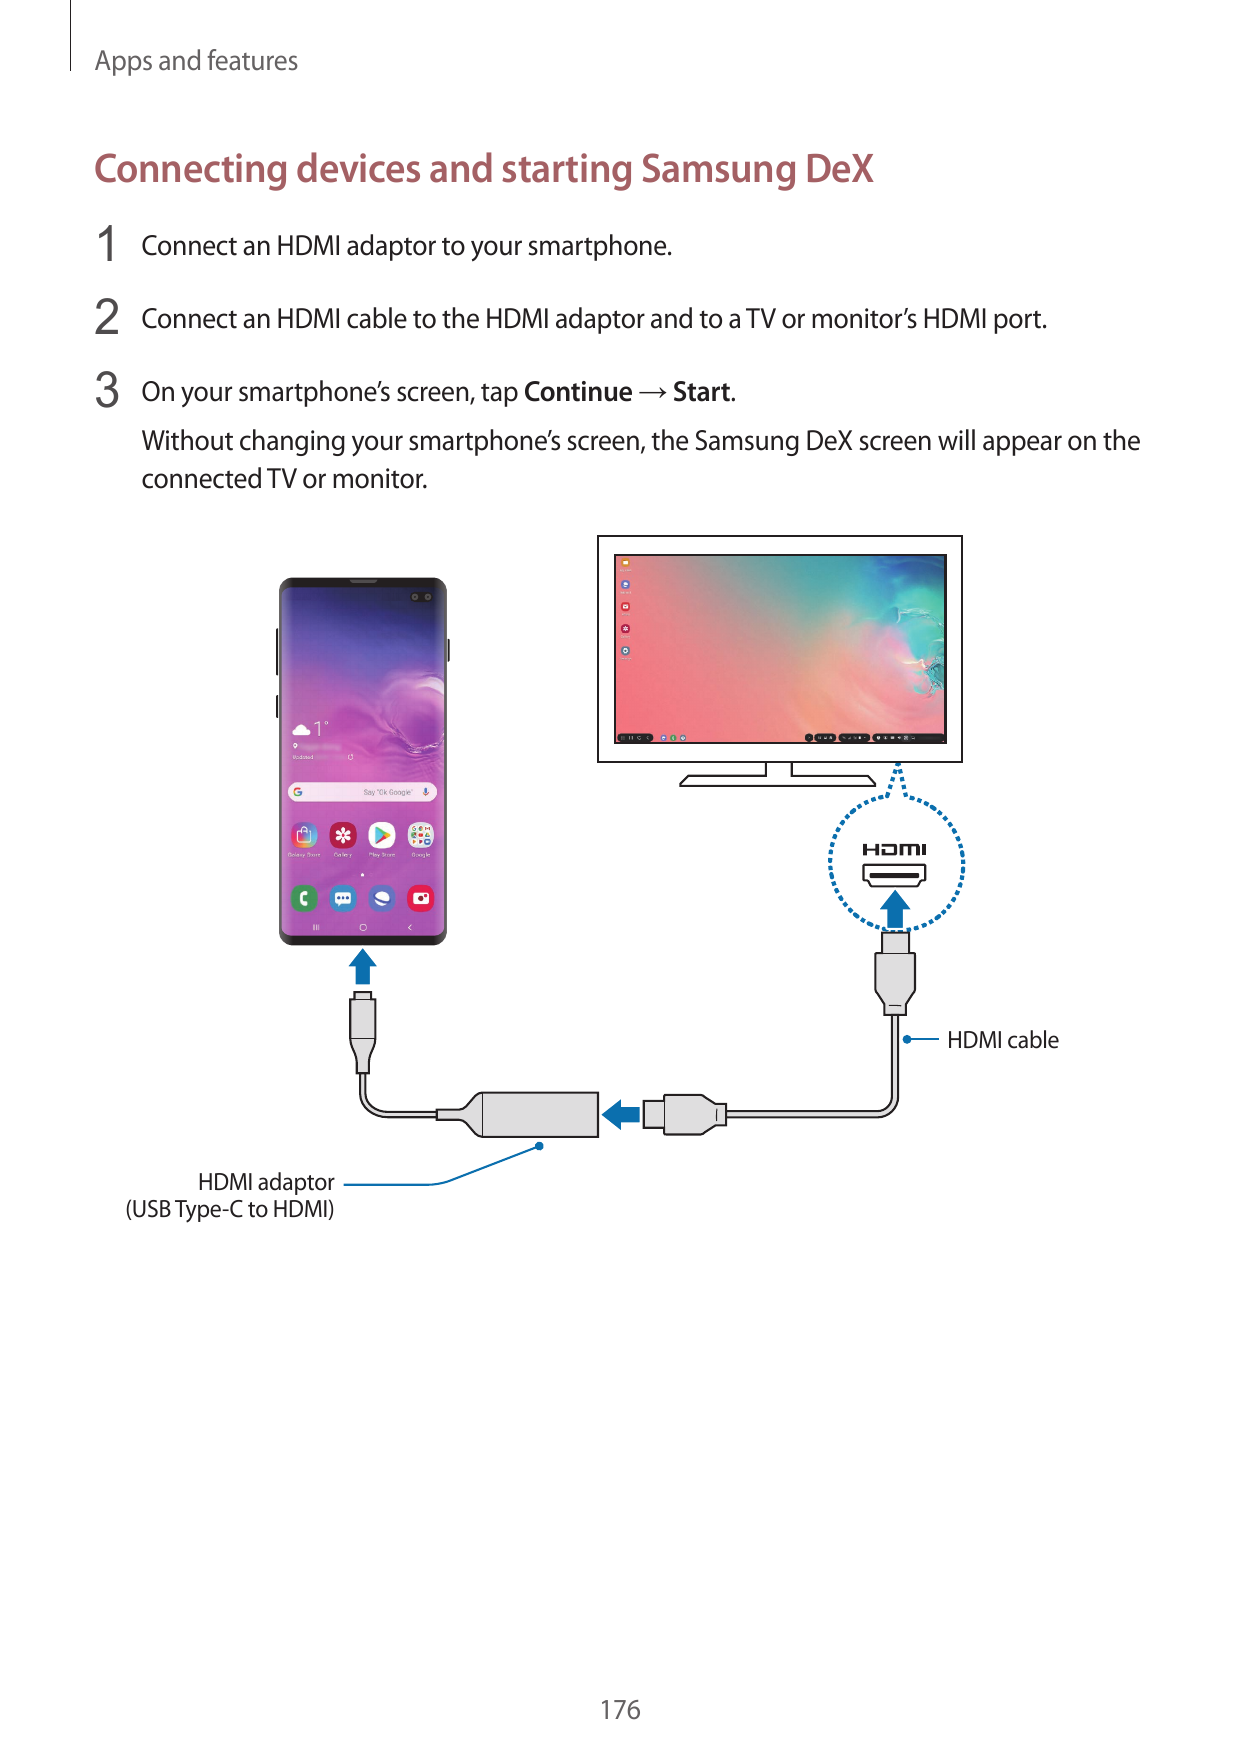 Apps and featuresConnecting devices and starting Samsung DeX1 Connect an HDMI adaptor to your smartphone.2 Connect an HDMI cable